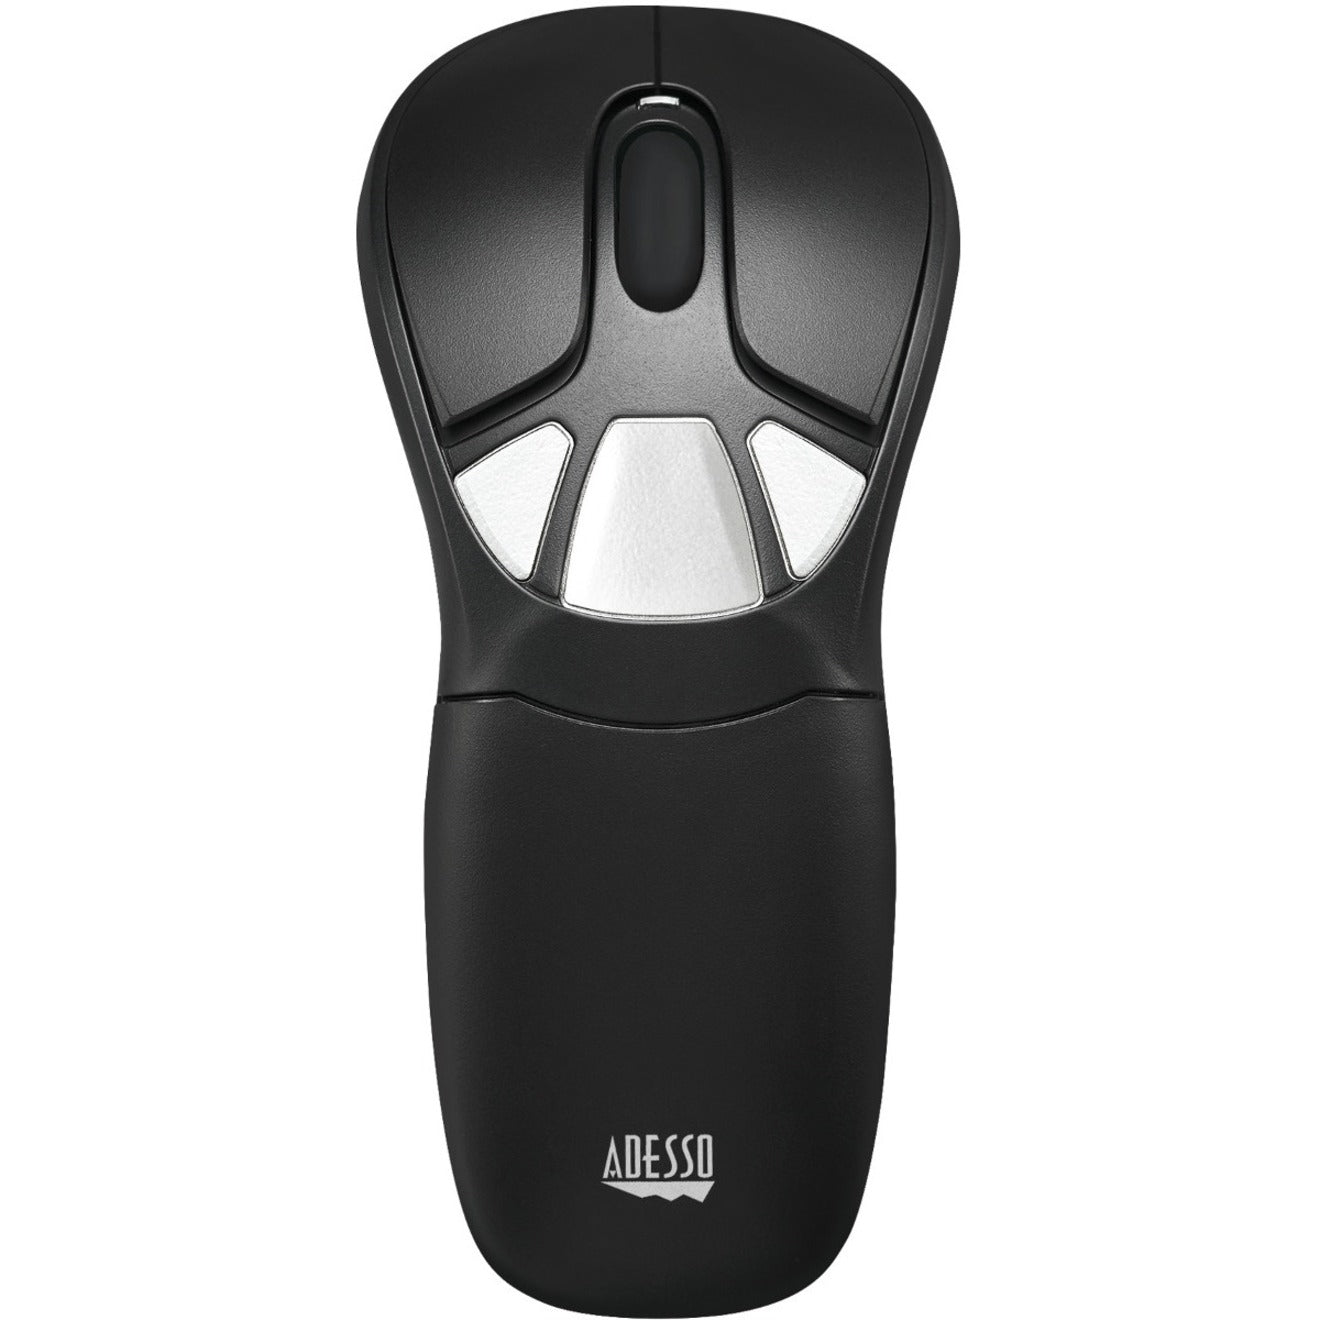 Adesso WKB-5300CB Air Mouse Go Plus With Full Size Keyboard, Wireless Presentation Pointer, 2.4 GHz, Quiet Keys